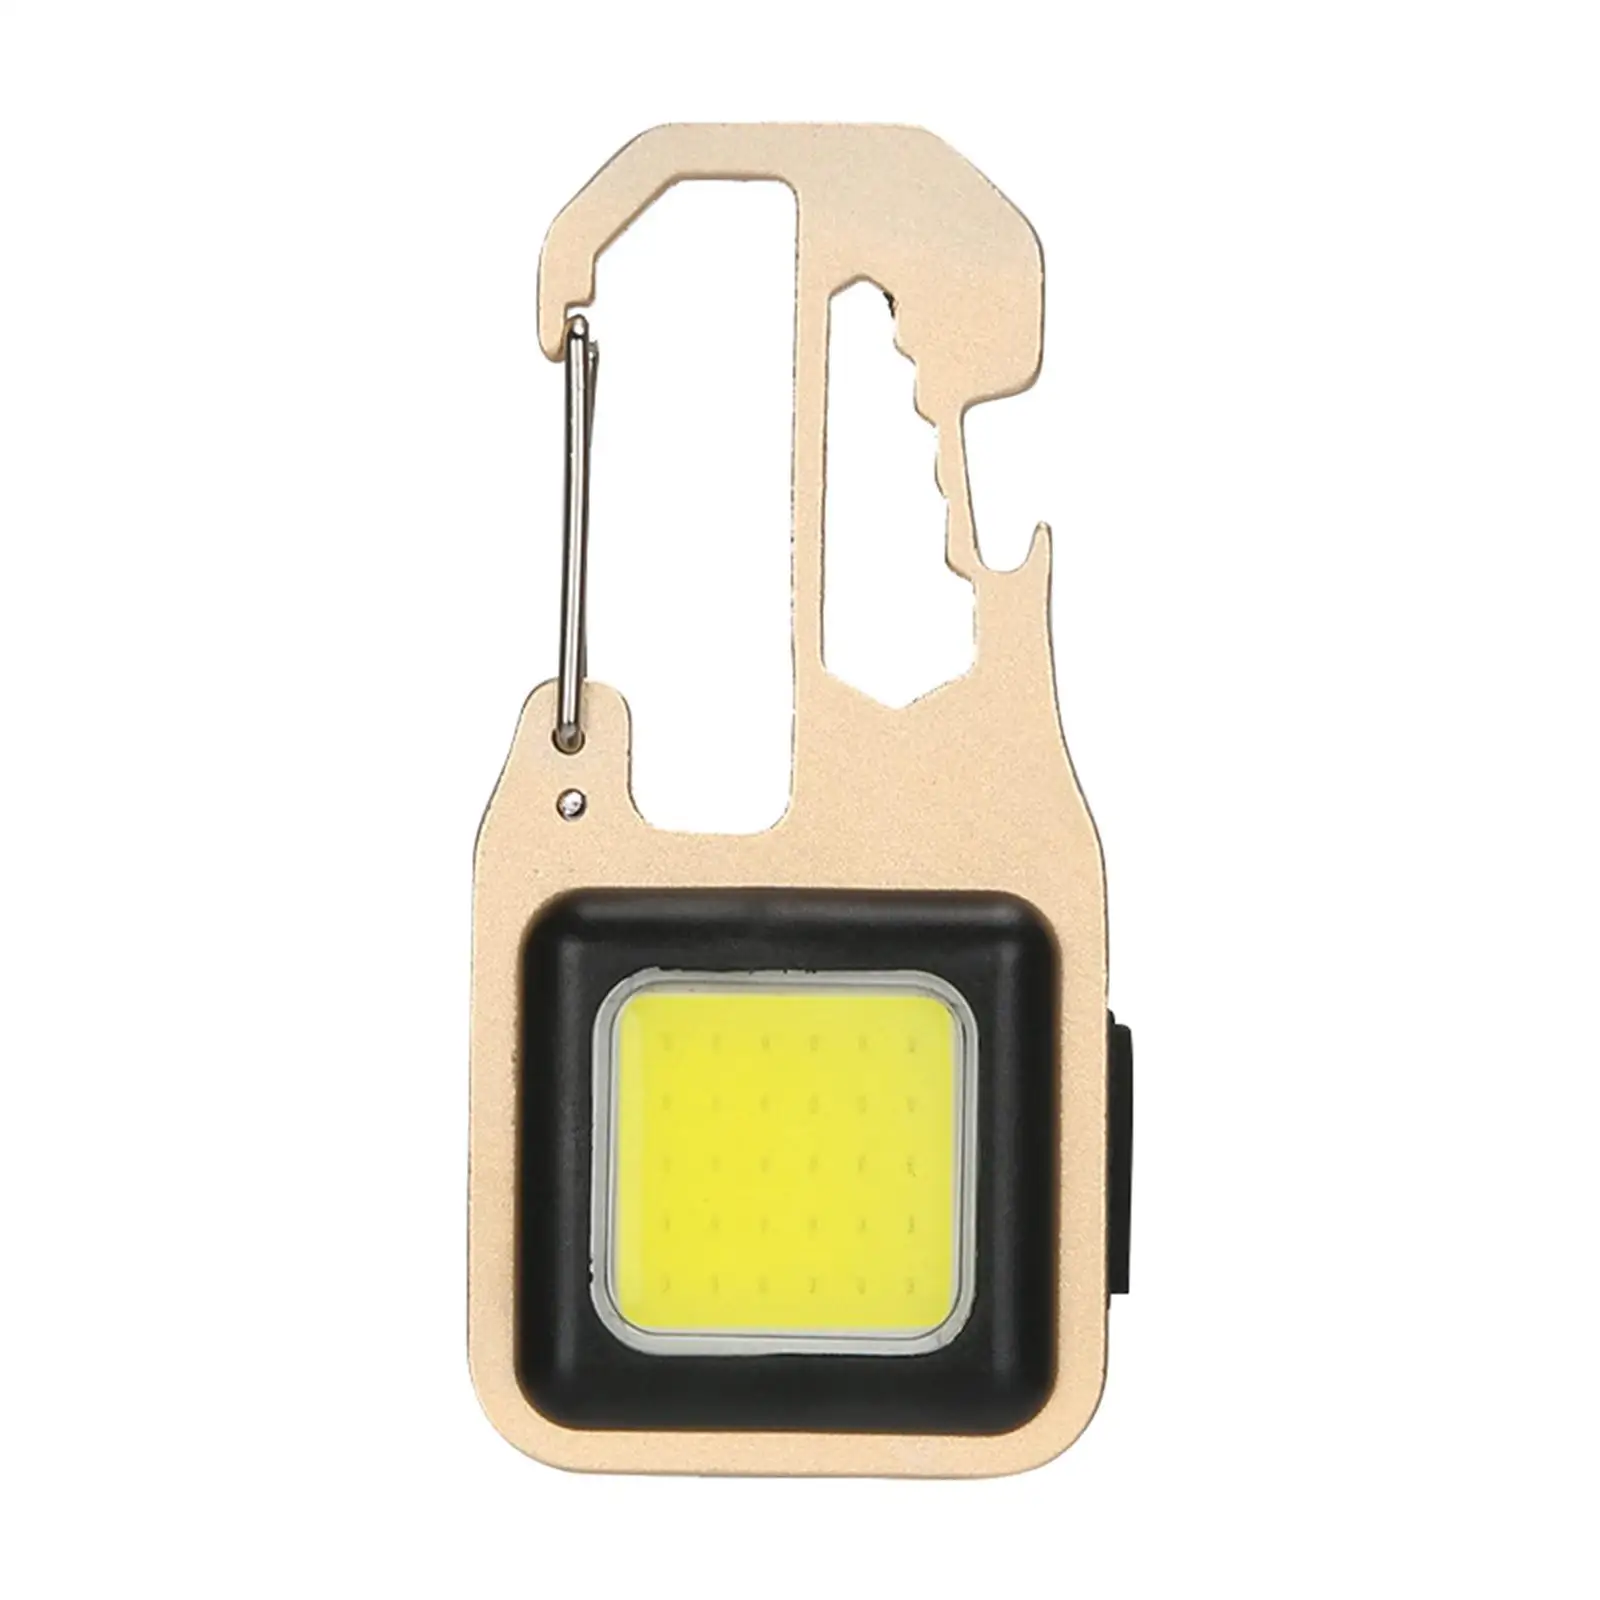 Portable COB flashlights Keychain Bottle Opener Camping Lamp Magnet Base Keyring Torch Light USB LED Rechargeable Bright